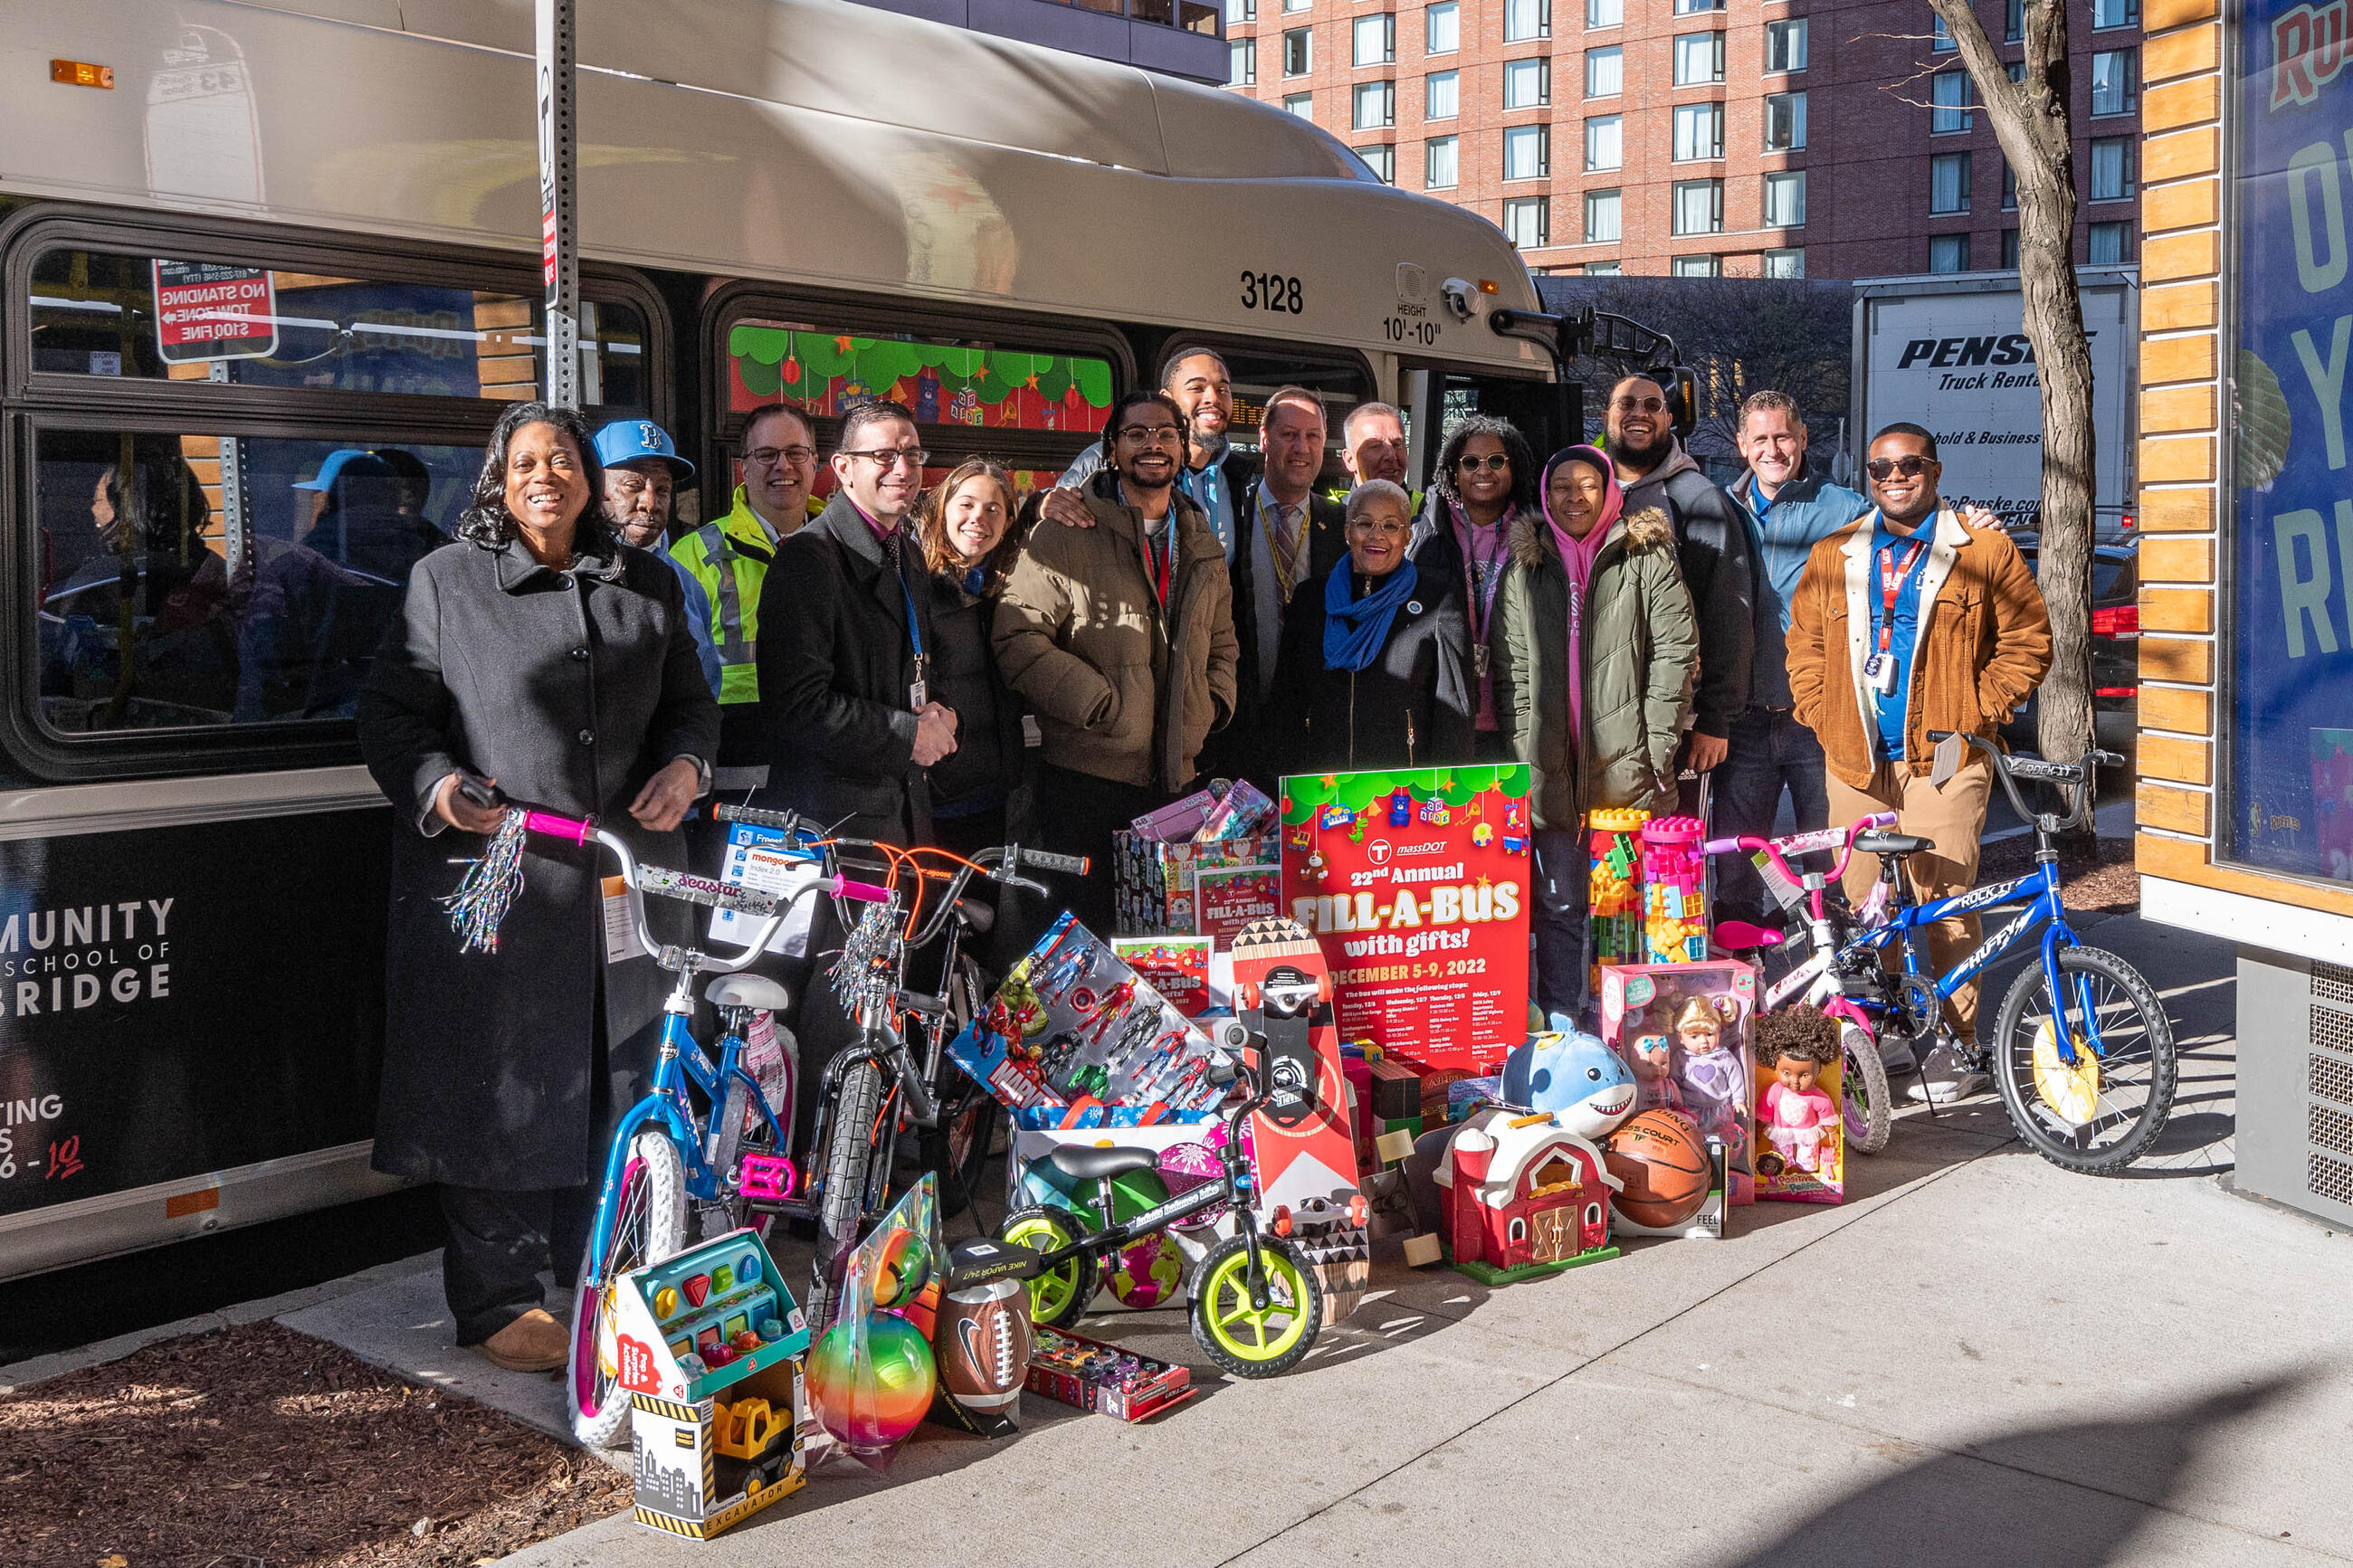 MBTA General Manager Poftak was today joined by T staff, including Event Organizer and MBTA Graphics Design Manager David Wood and MBTA Holiday Bus Route Operator Mike Broderick, for the final stop of the 22nd annual Fill-A-Bus with Gifts holiday drive at the State Transportation Building in Boston.